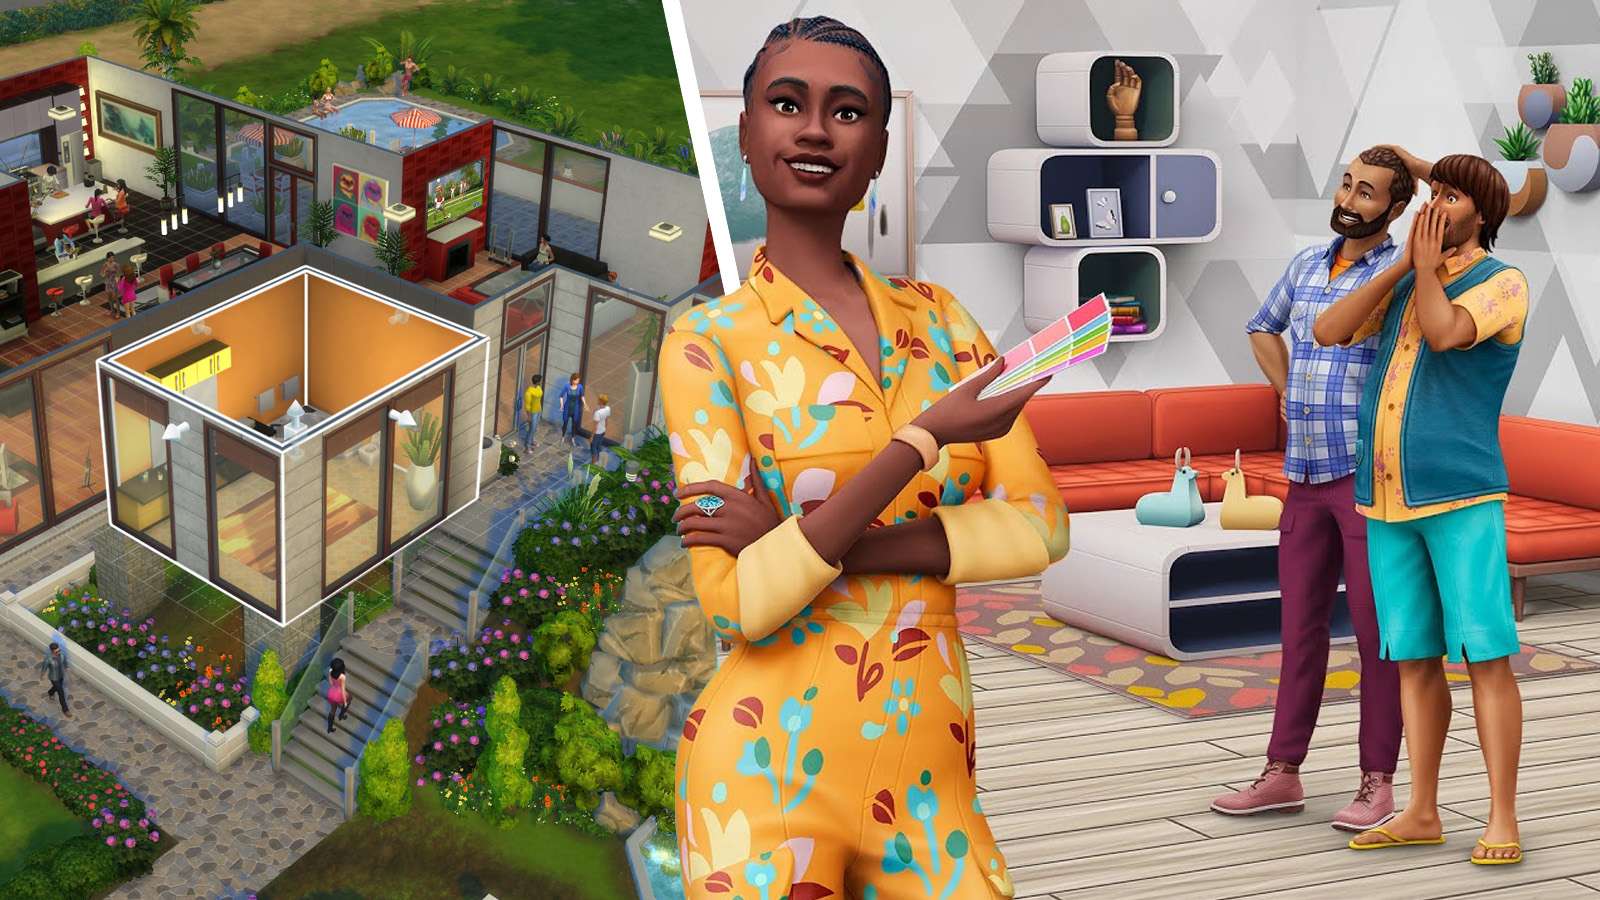 The Sims 4 house builds with Dream Home Decorator